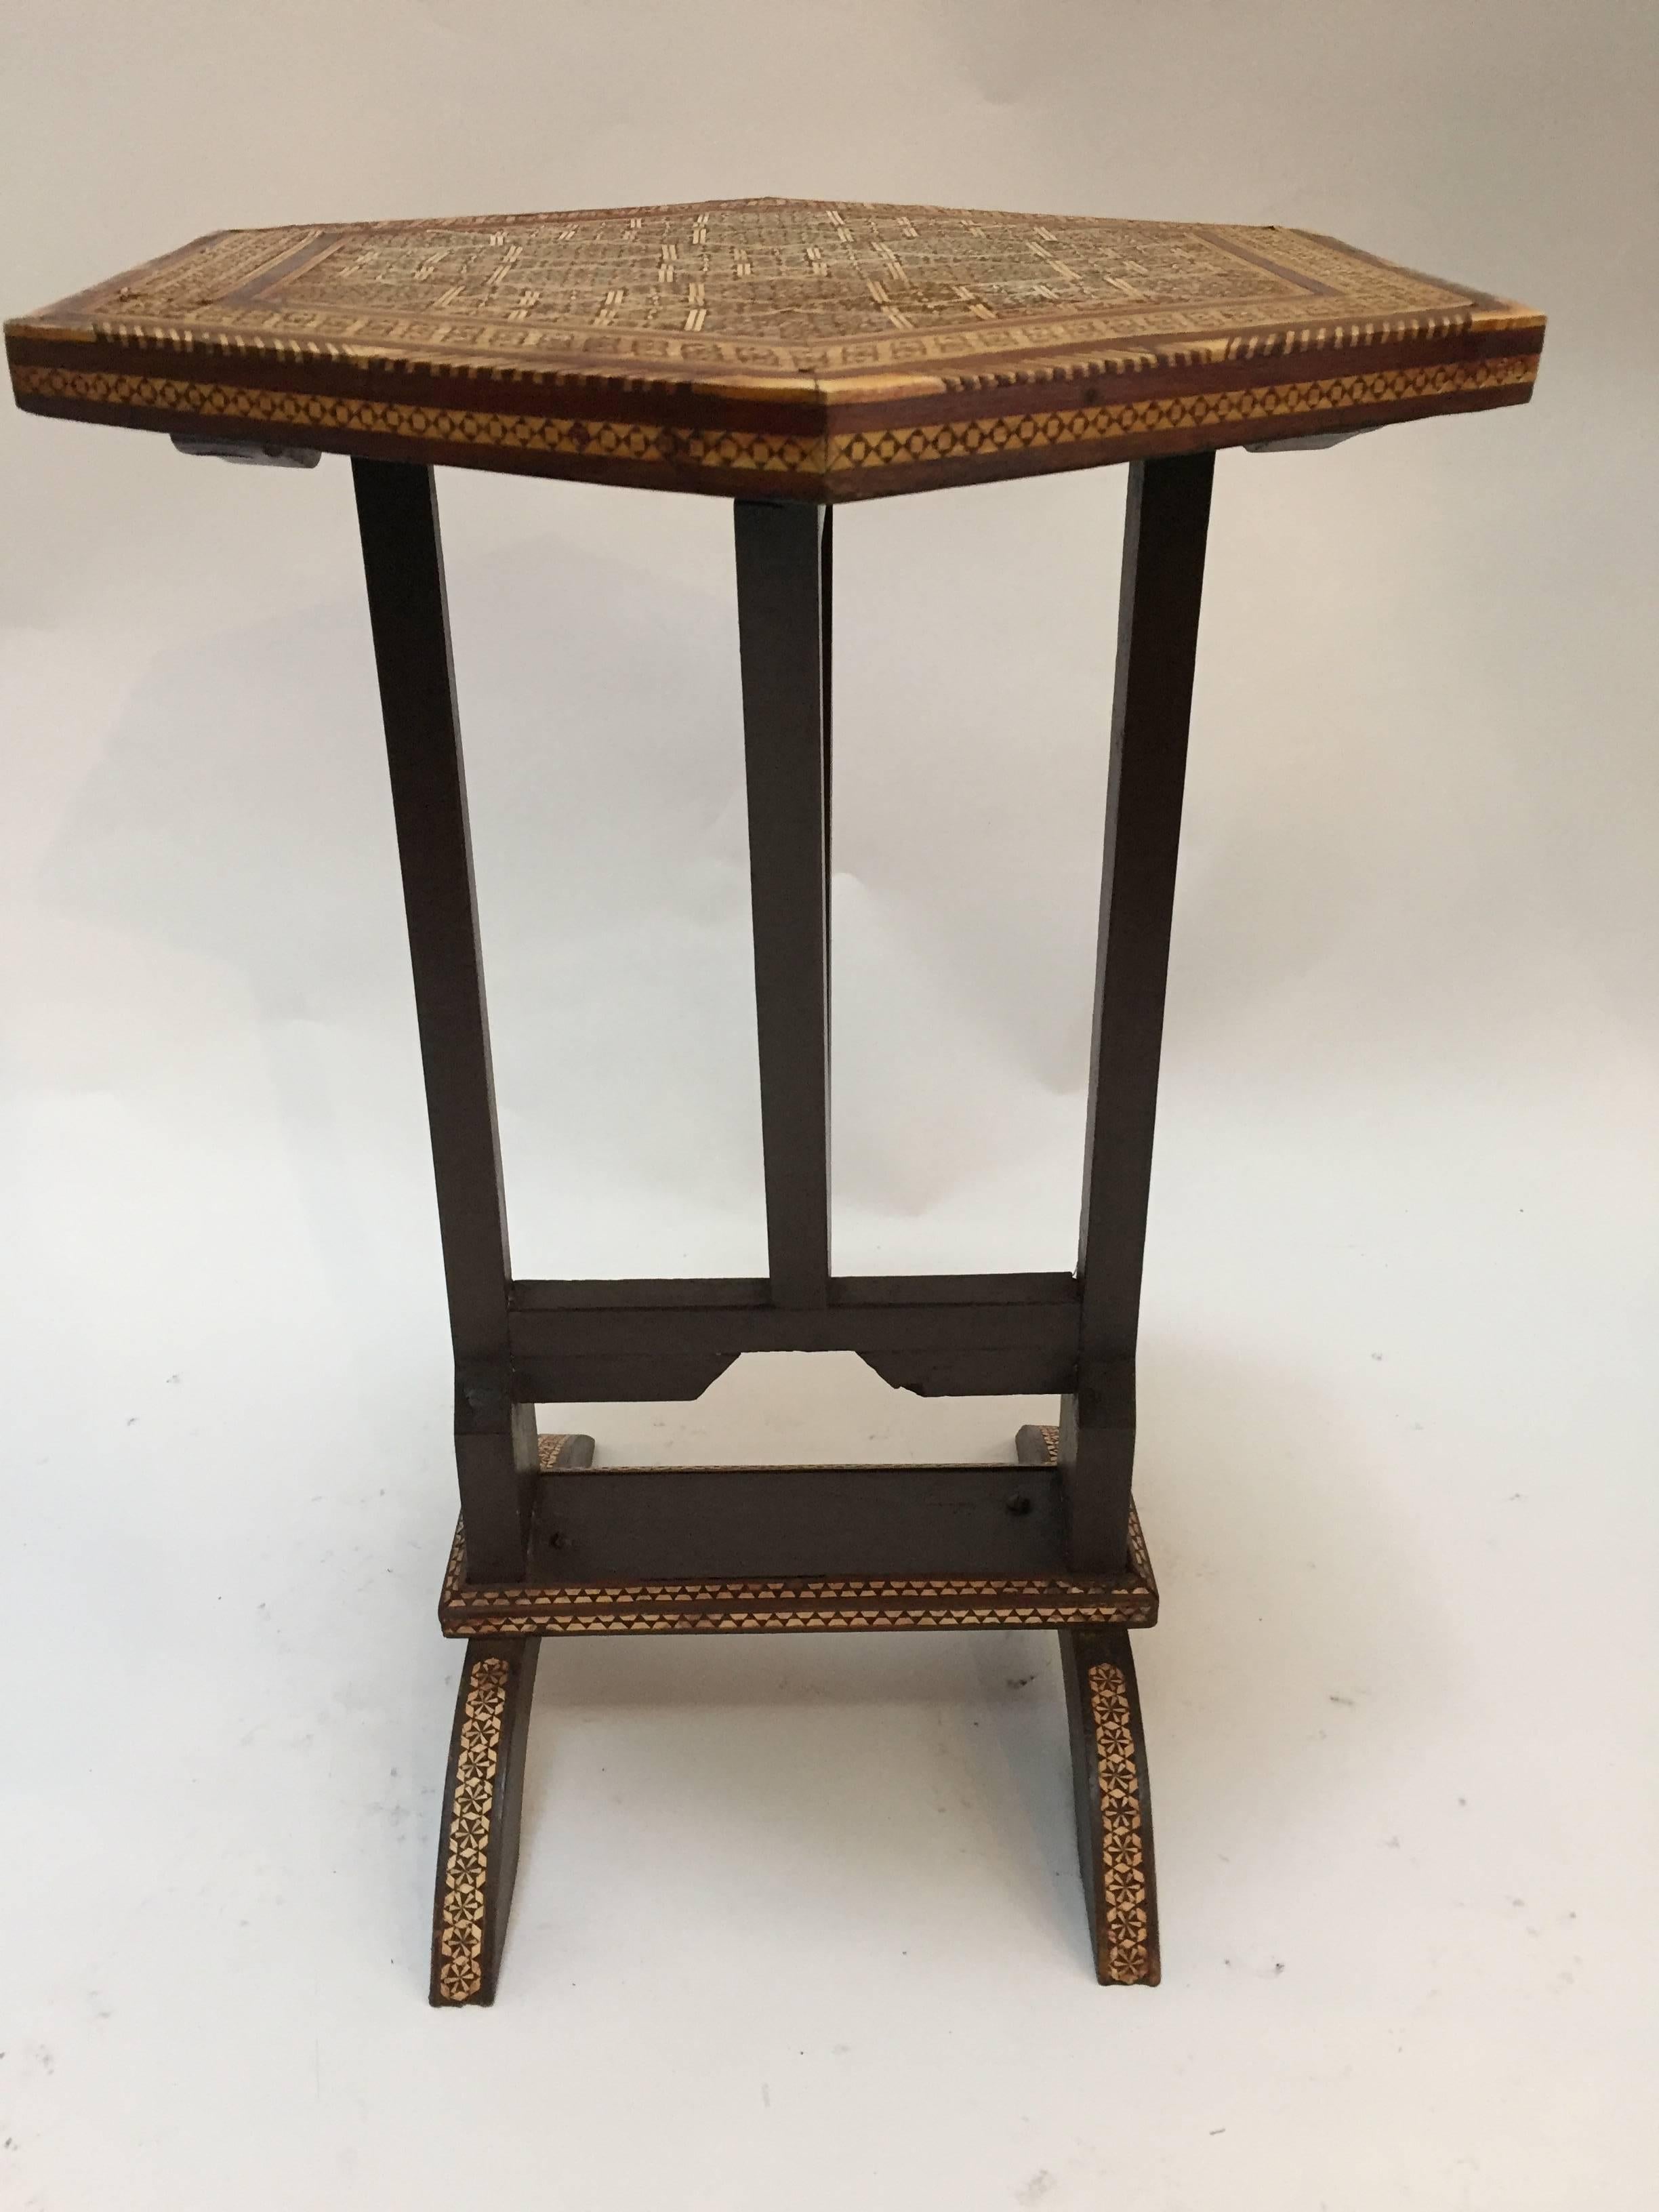 Middle Eastern Egyptian octagonal side table with marquetry inlaid and mother-of-pearl. 
Tilt-top table with Moorish intricate geometric designs.
Handcrafted by skilled artisans in Egypt.